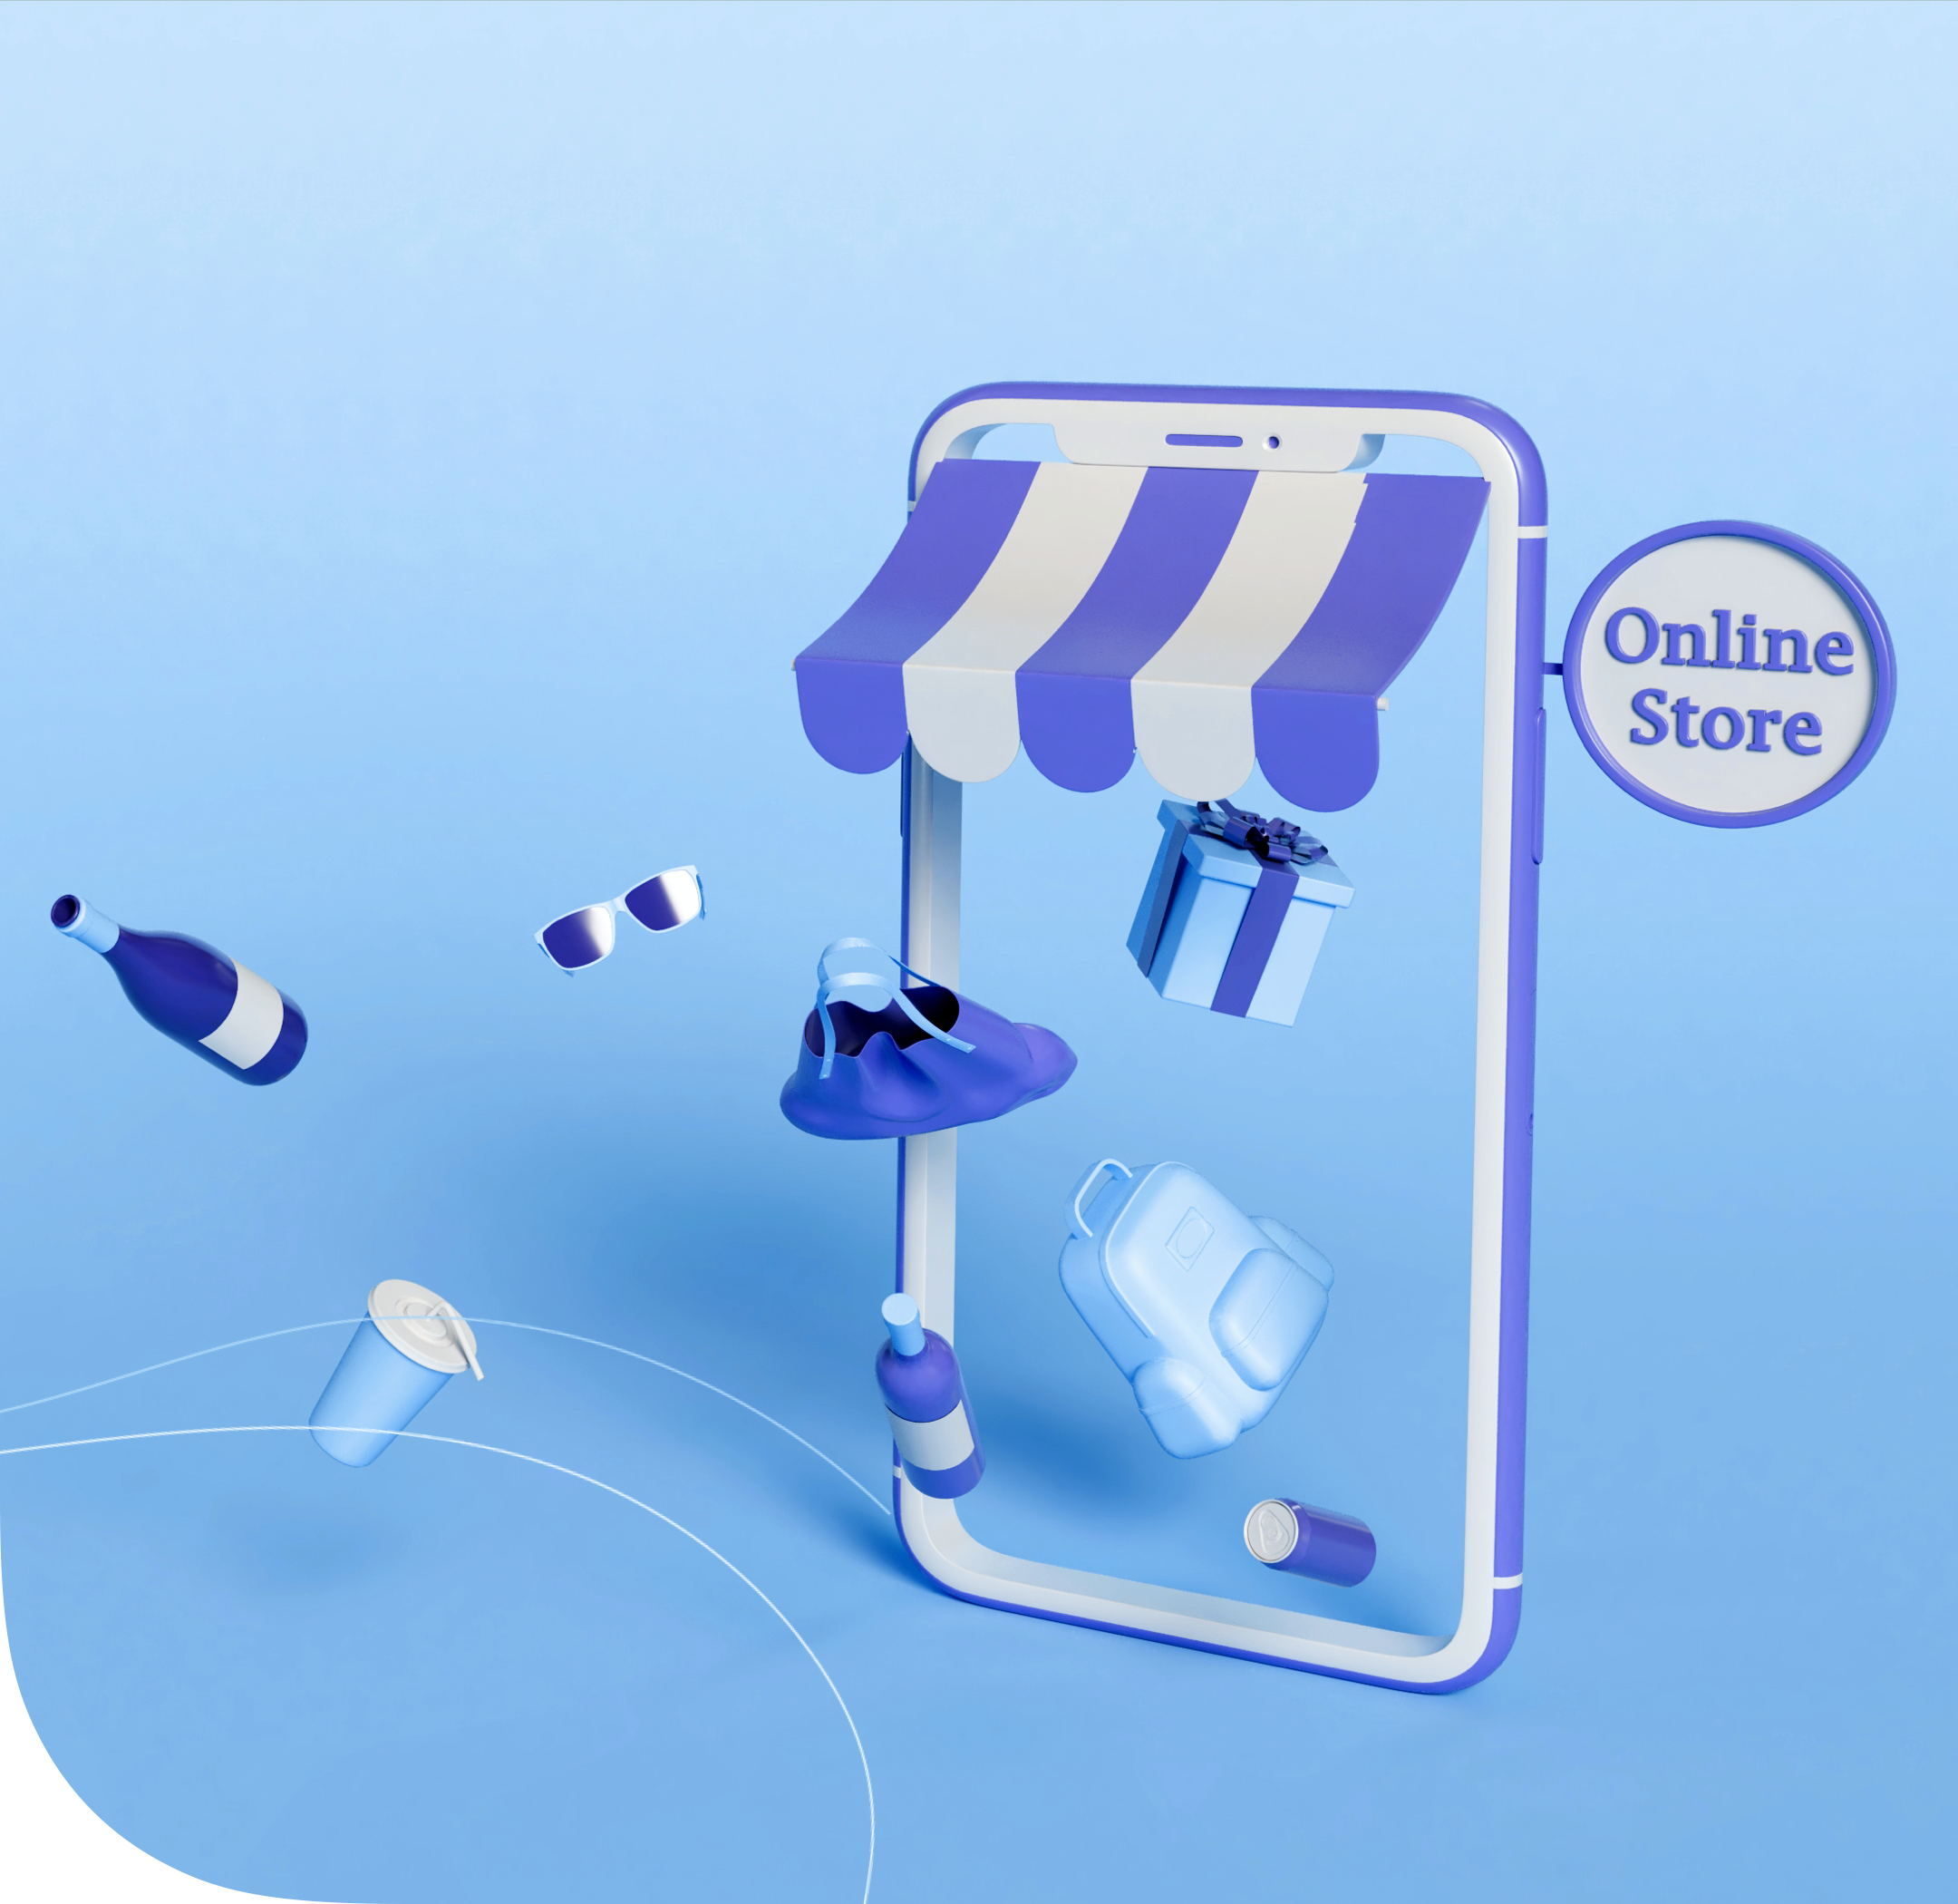 Digital Commerce Trends of the Pandemic: Buy Online, Pickup In-Store